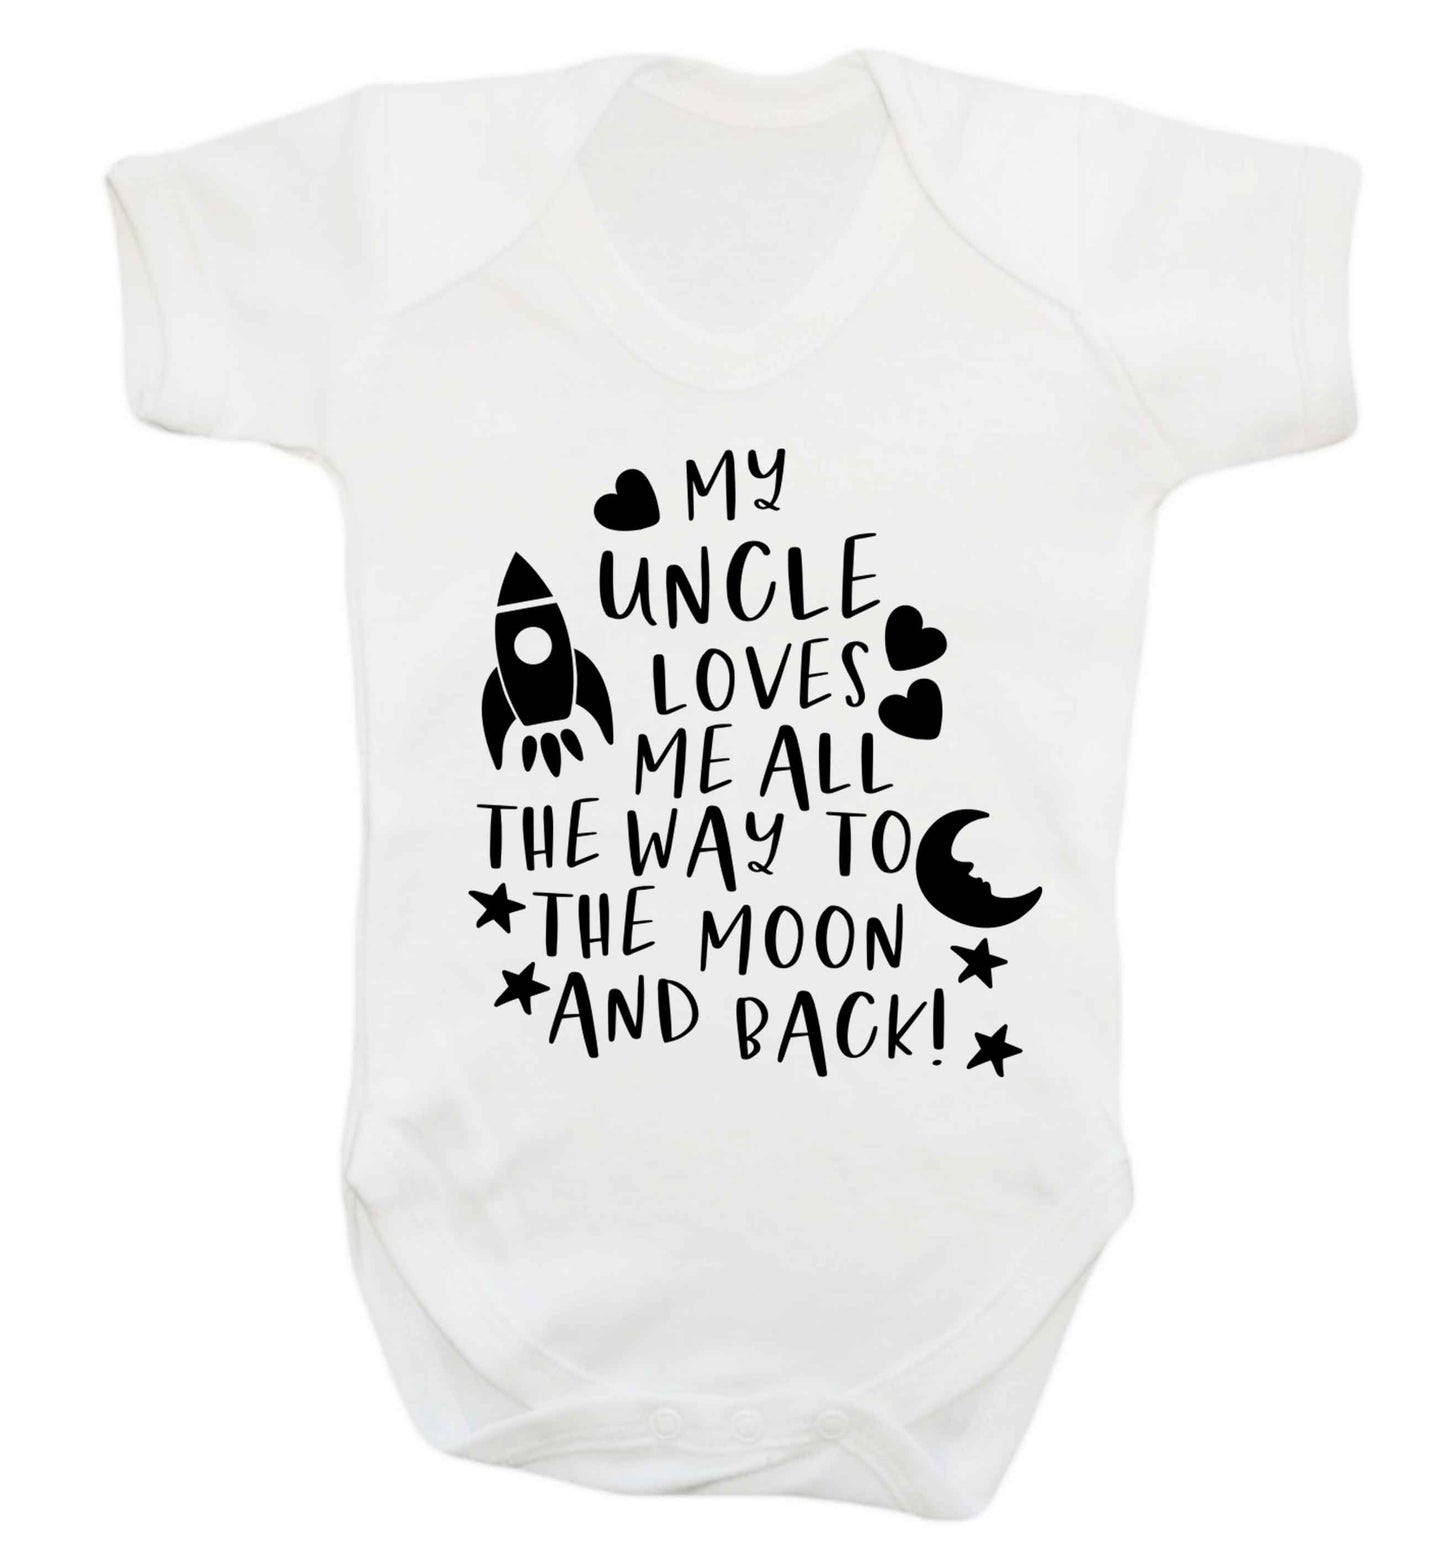 My uncle loves me all the way to the moon and back Baby Vest white 18-24 months